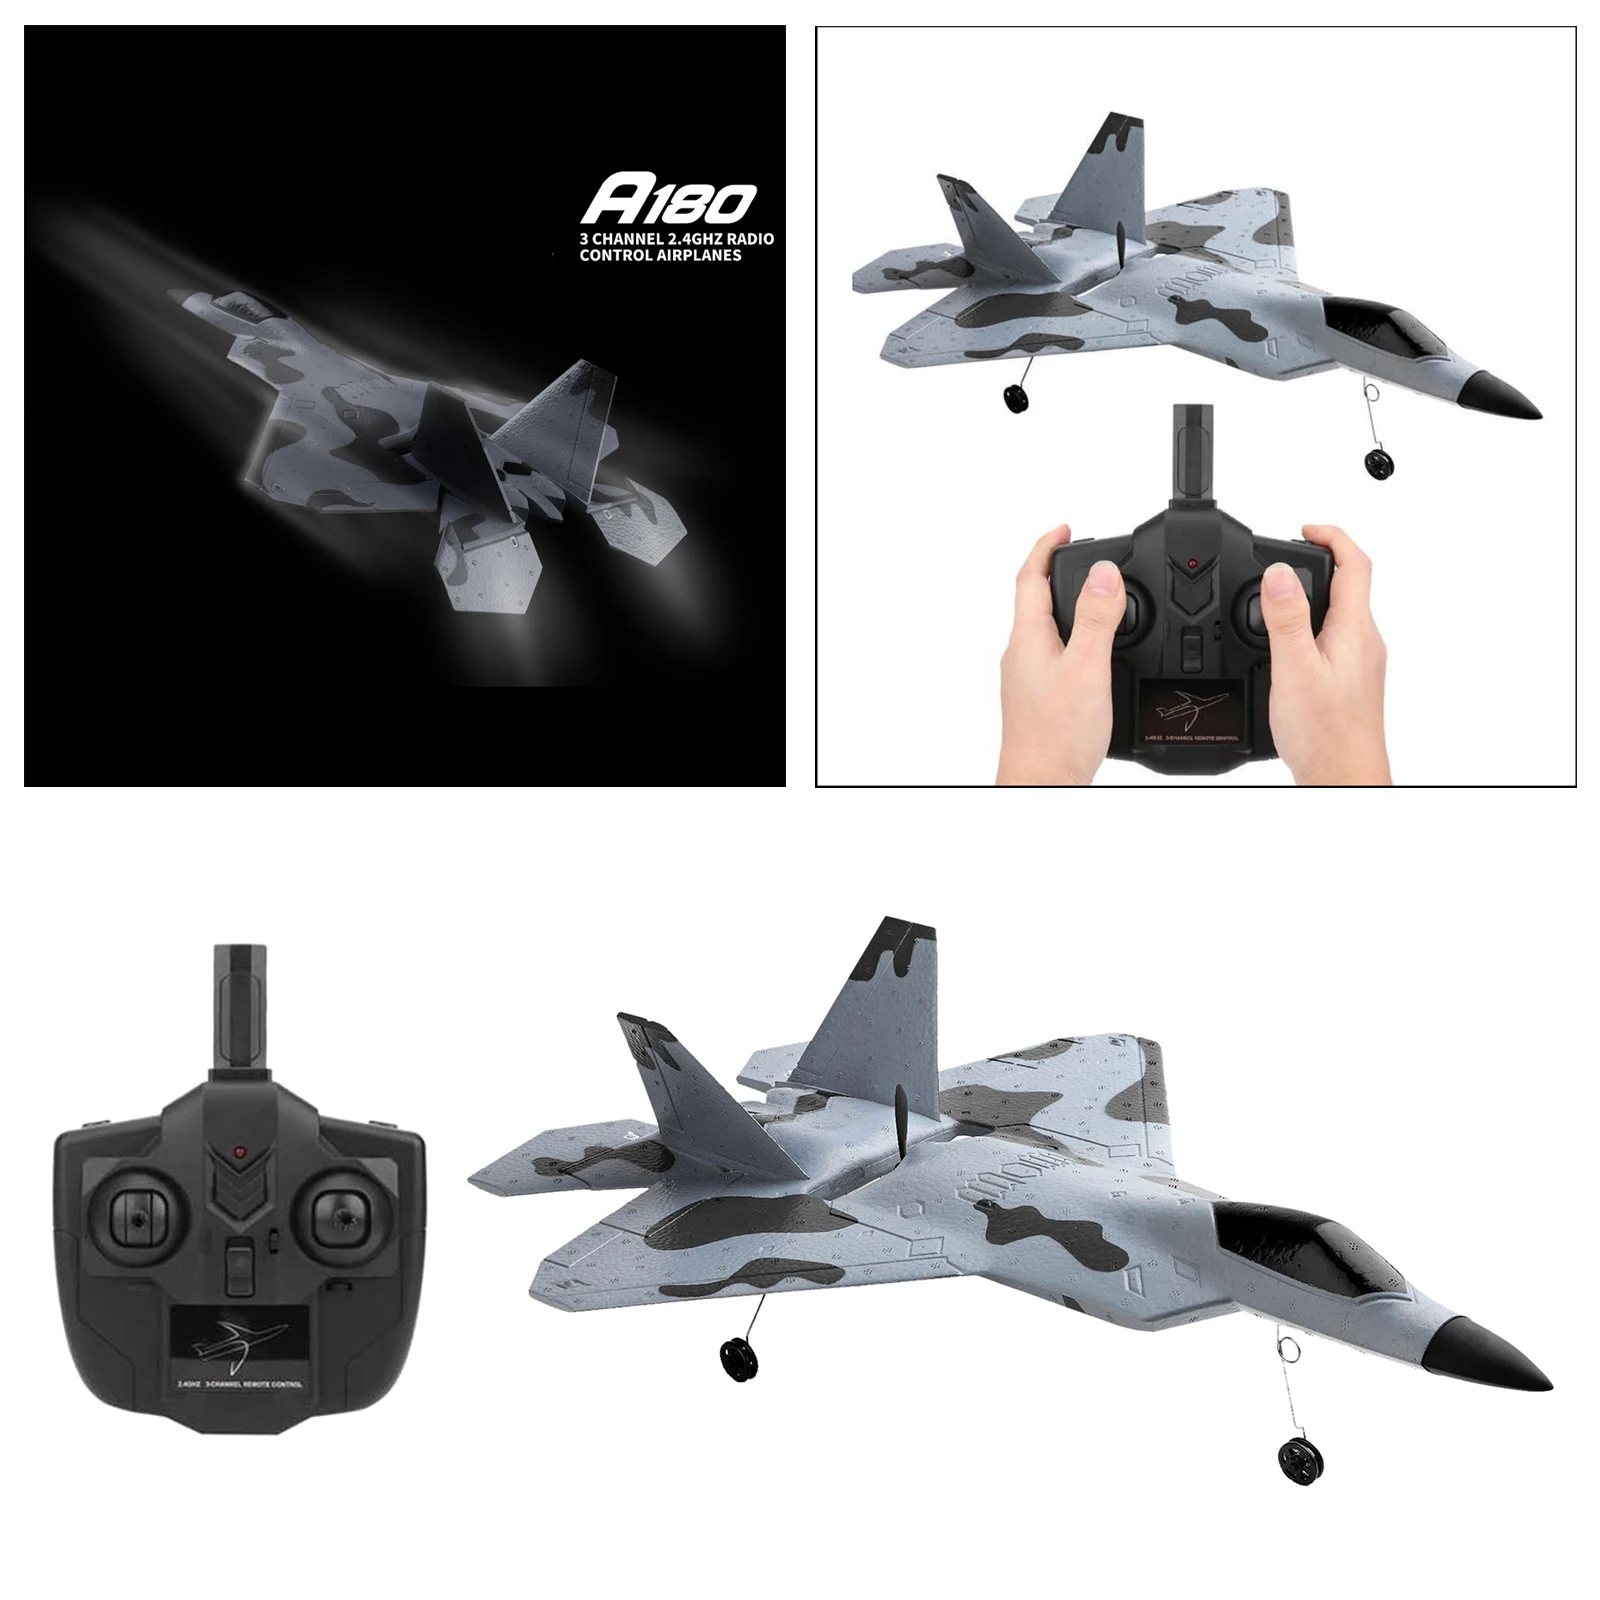 Wltoys XK A180 F22 Aircraft Model Brushless Motor Glider 3D/6G RC Airplane Plane Fighter 2.4Ghz 3-CH RTF EPP Material Toys